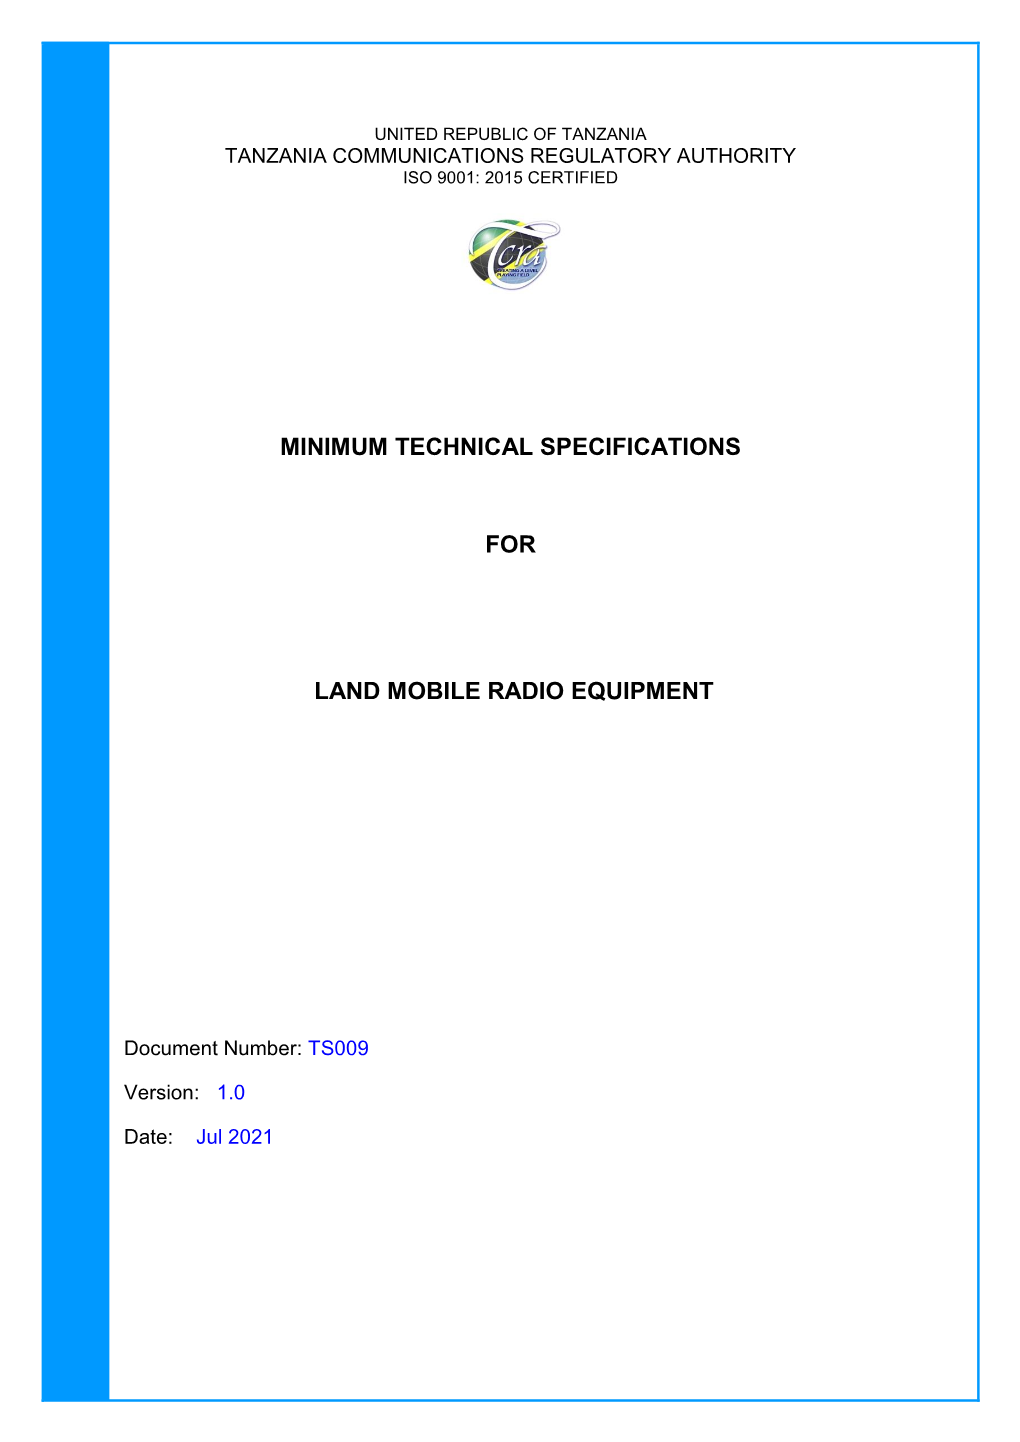 Minimum Technical Specifications for Land Mobile Radio